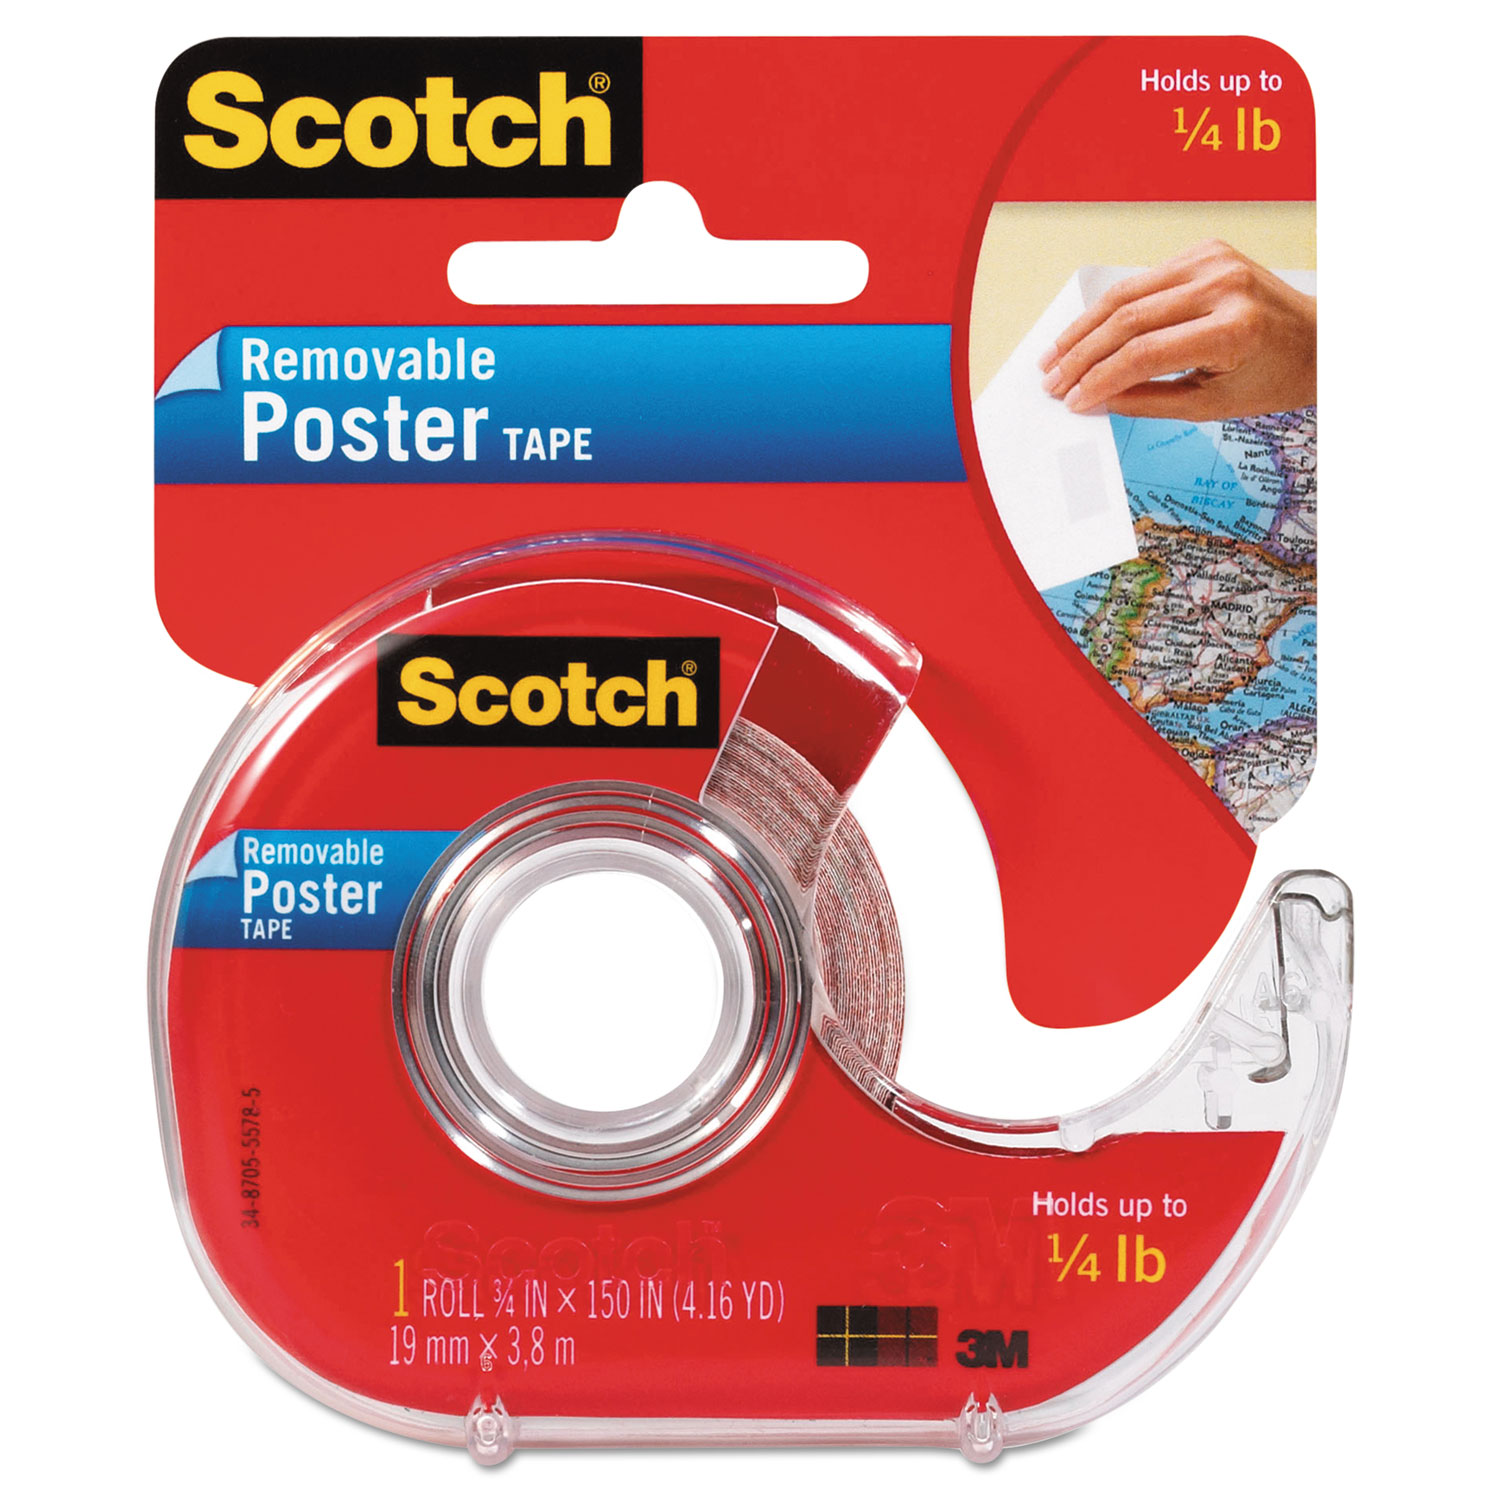 Wallsaver Removable Poster Tape, Double-Sided, 3/4 x 150 w/Dispenser